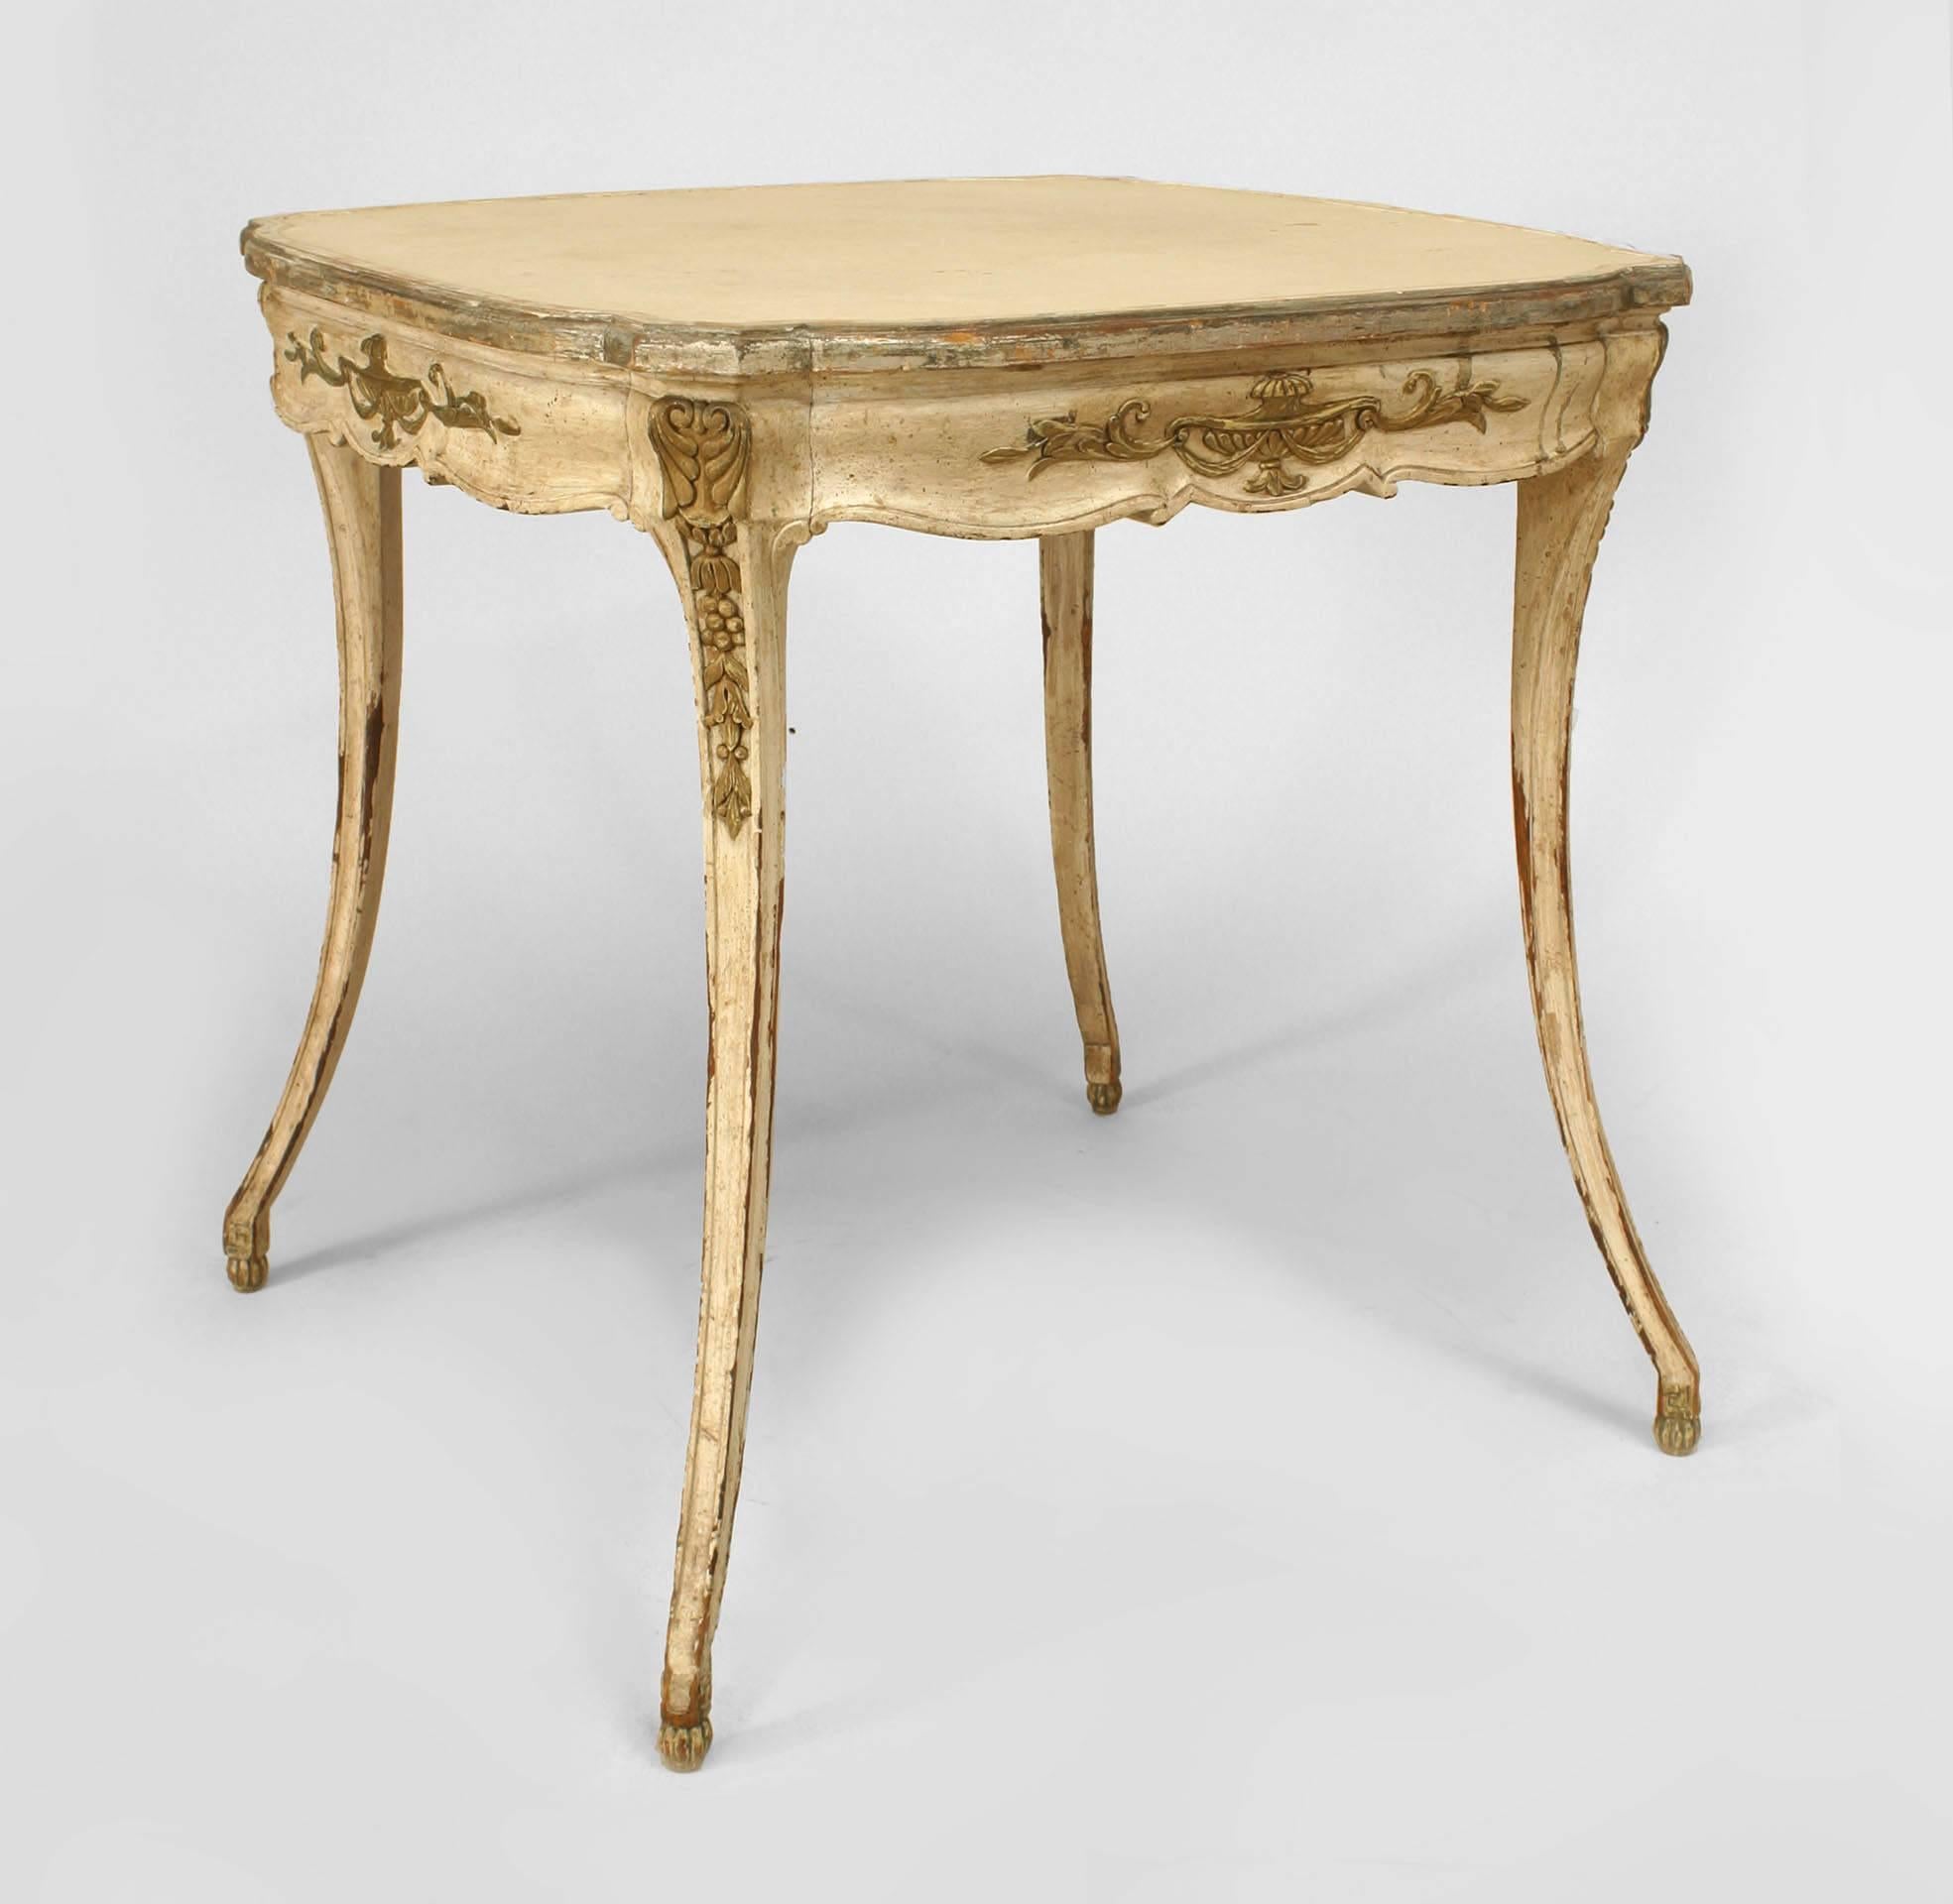 Italian Neoclassic style square end table painted white and decorated with silver gilt carvings on its apron and four splayed legs.